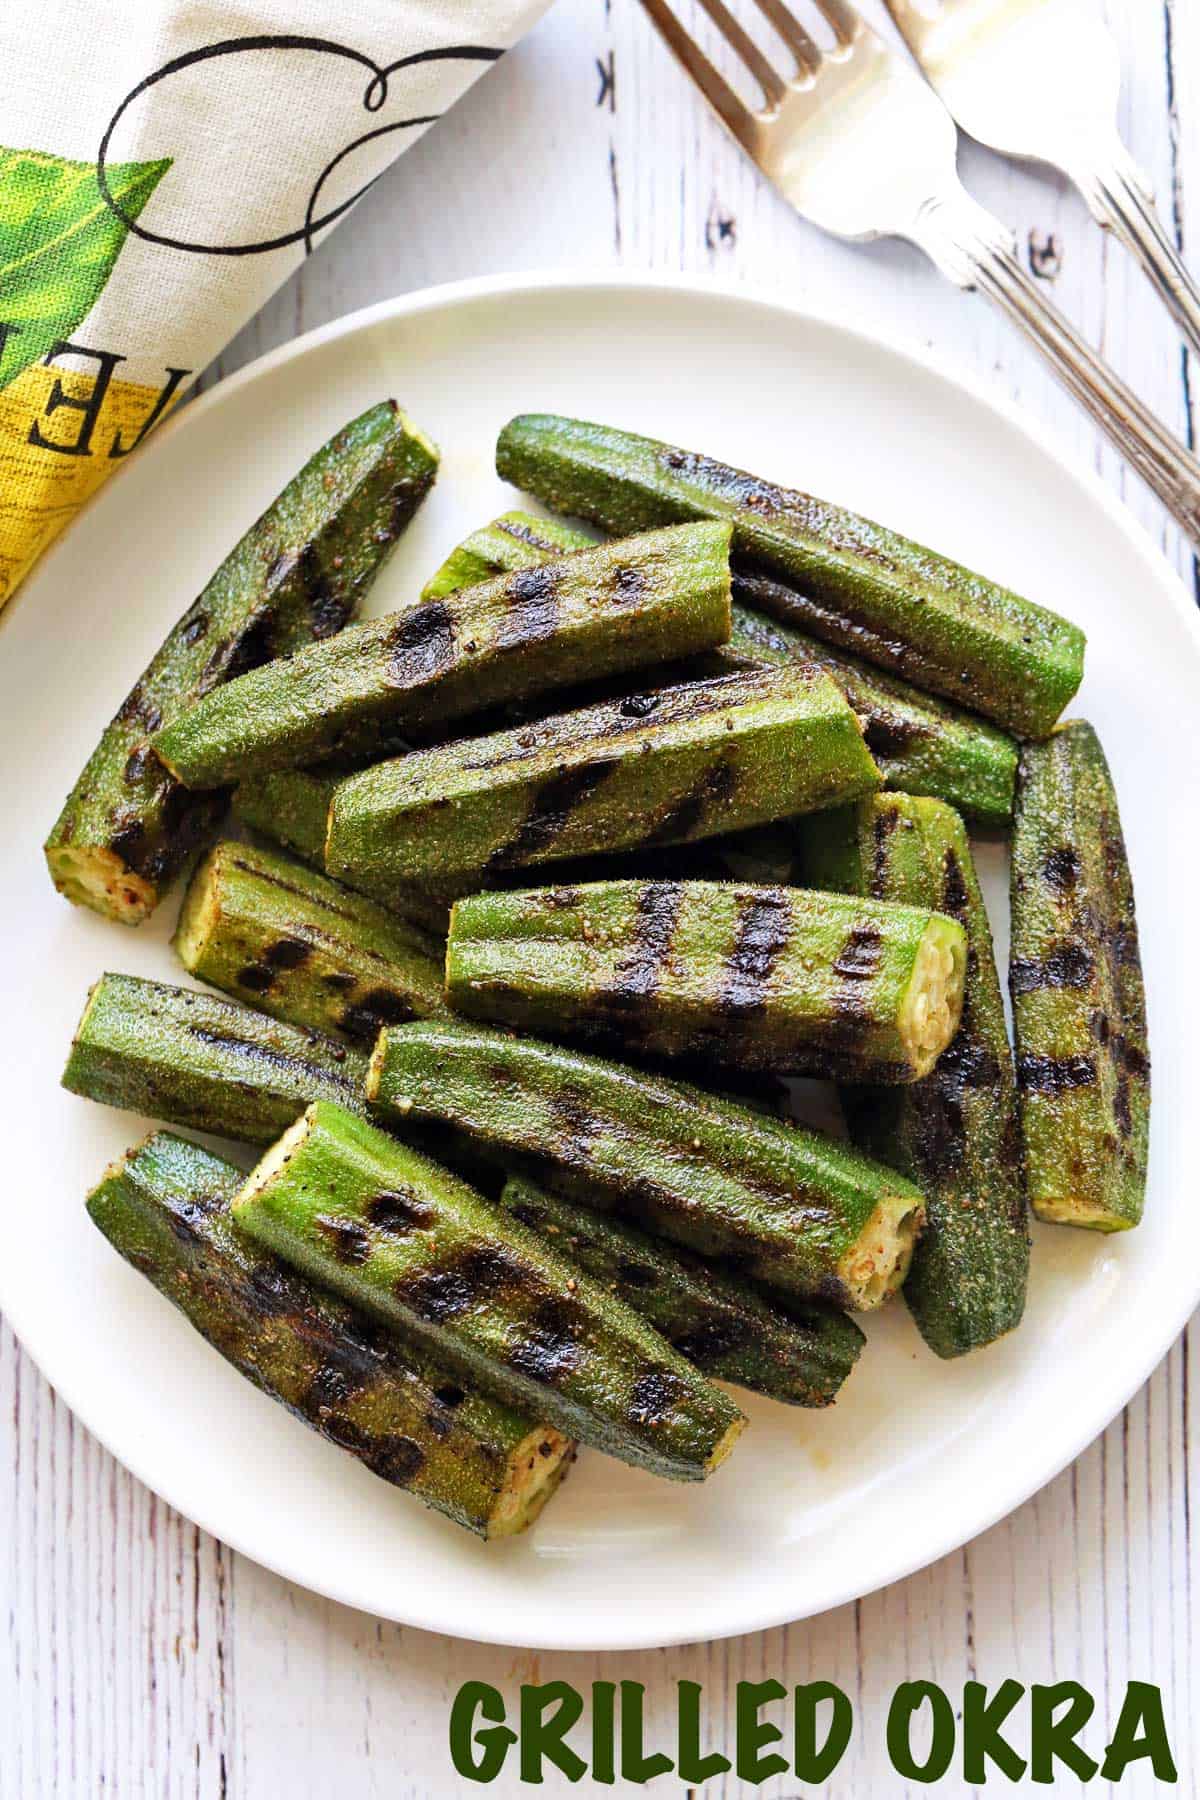 Grilled okra served on a plate with utensils and a napkin. 